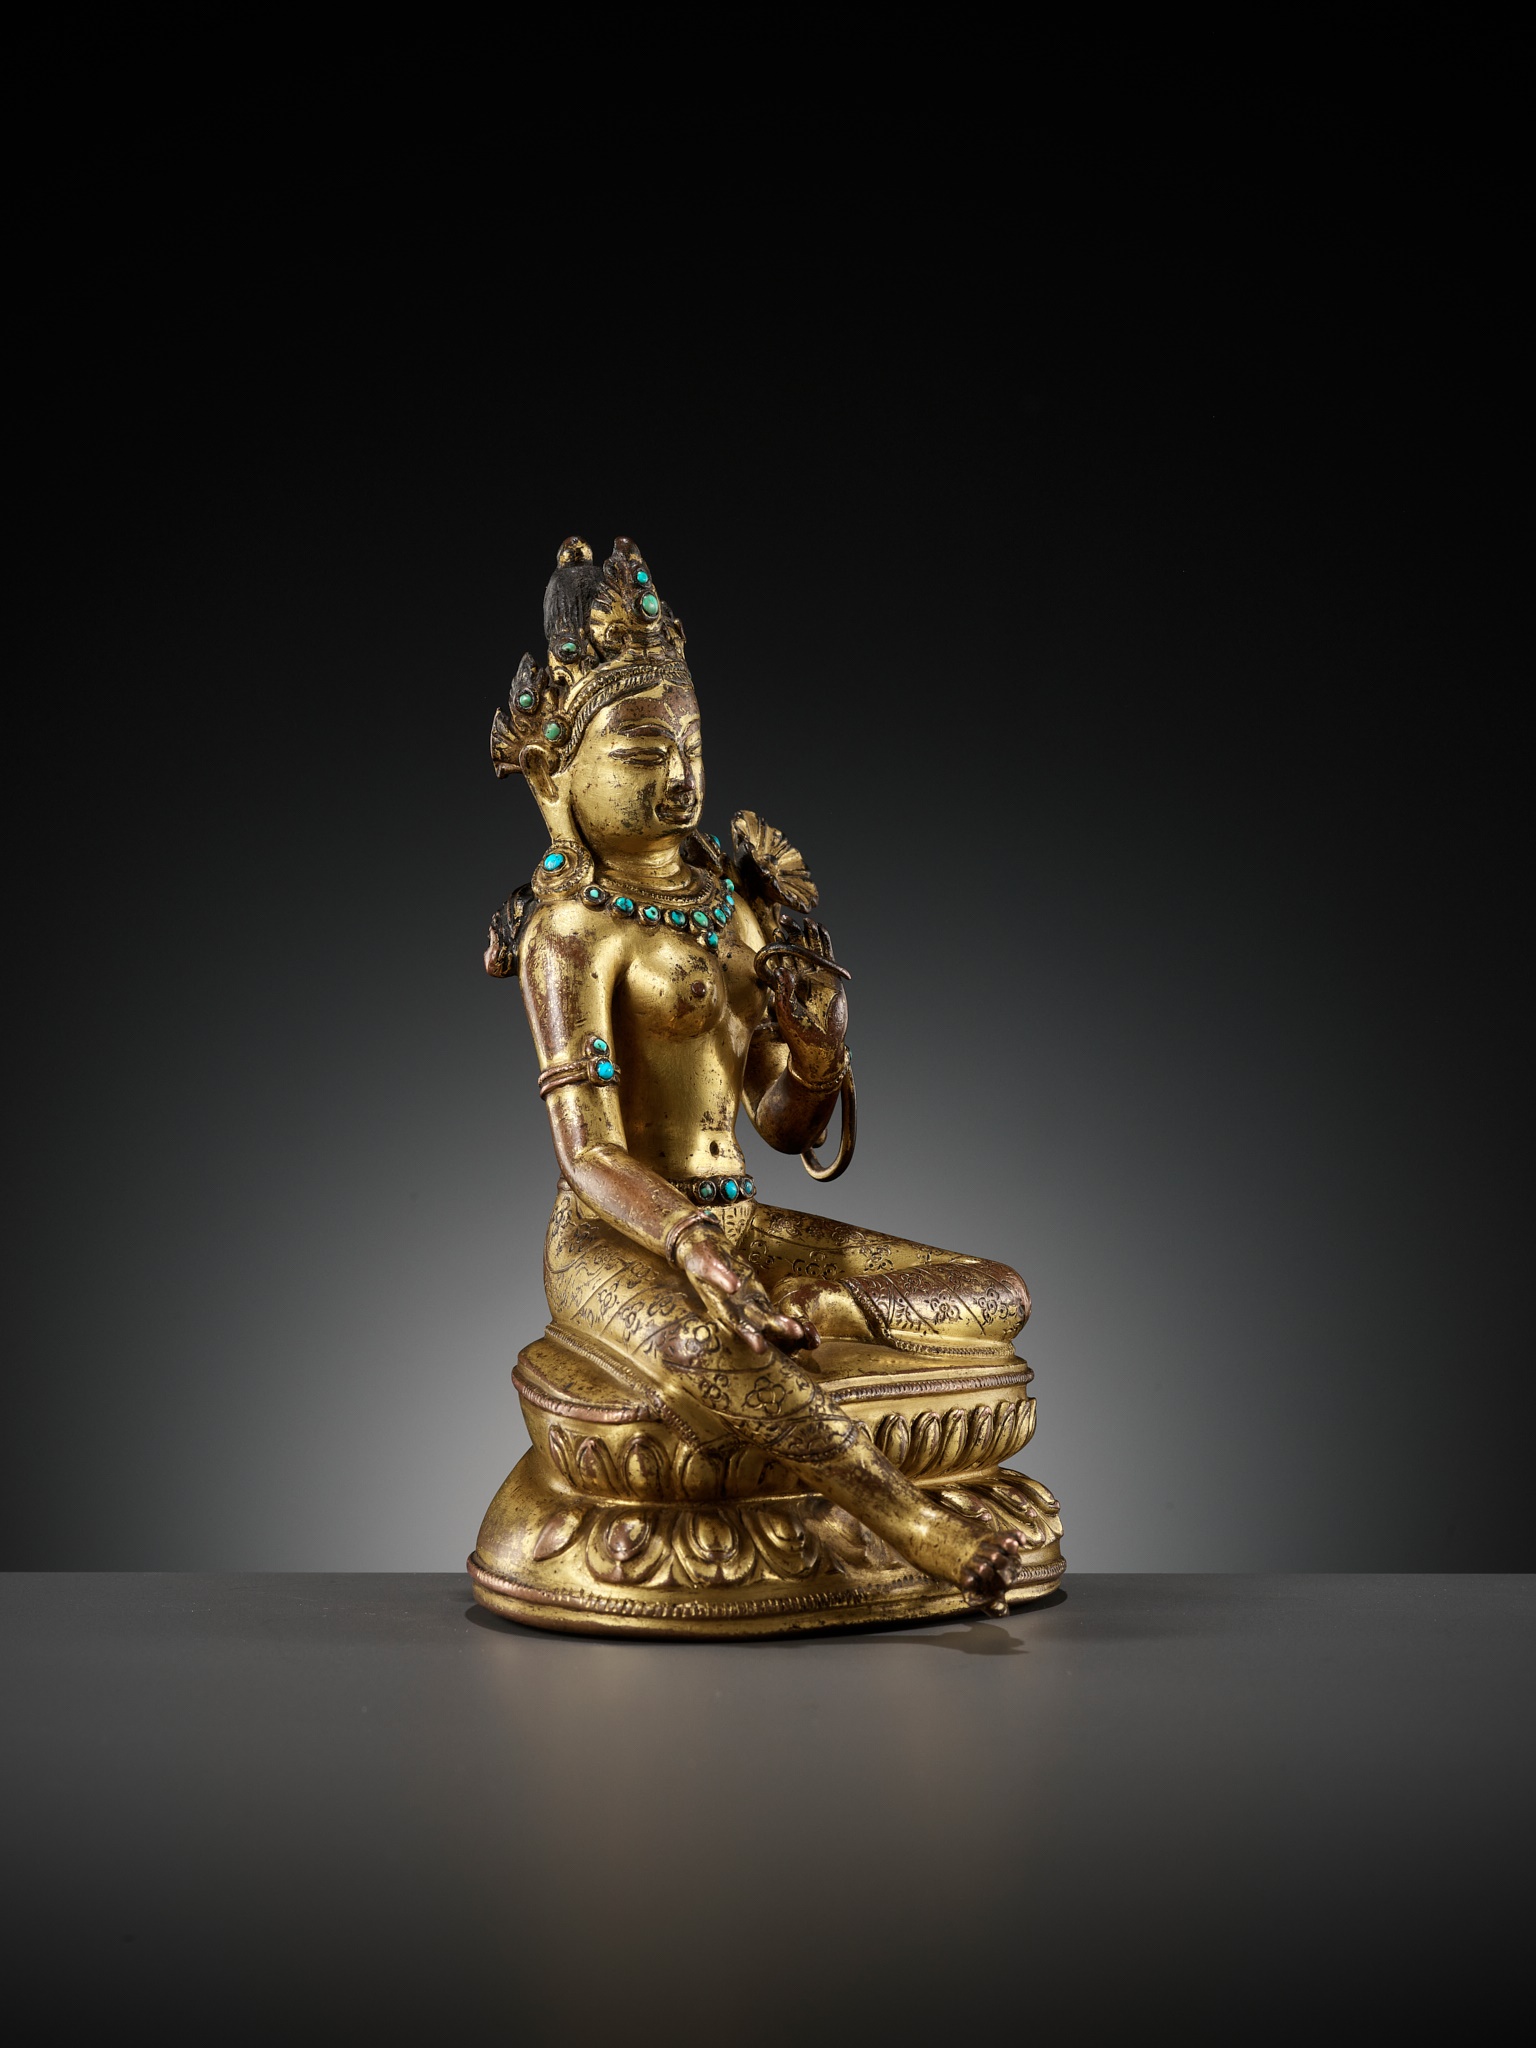 A GILT AND TURQUOISE-INLAID COPPER ALLOY FIGURE OF GREEN TARA, DENSATIL STYLE, TIBET, 14TH CENTURY - Image 12 of 16